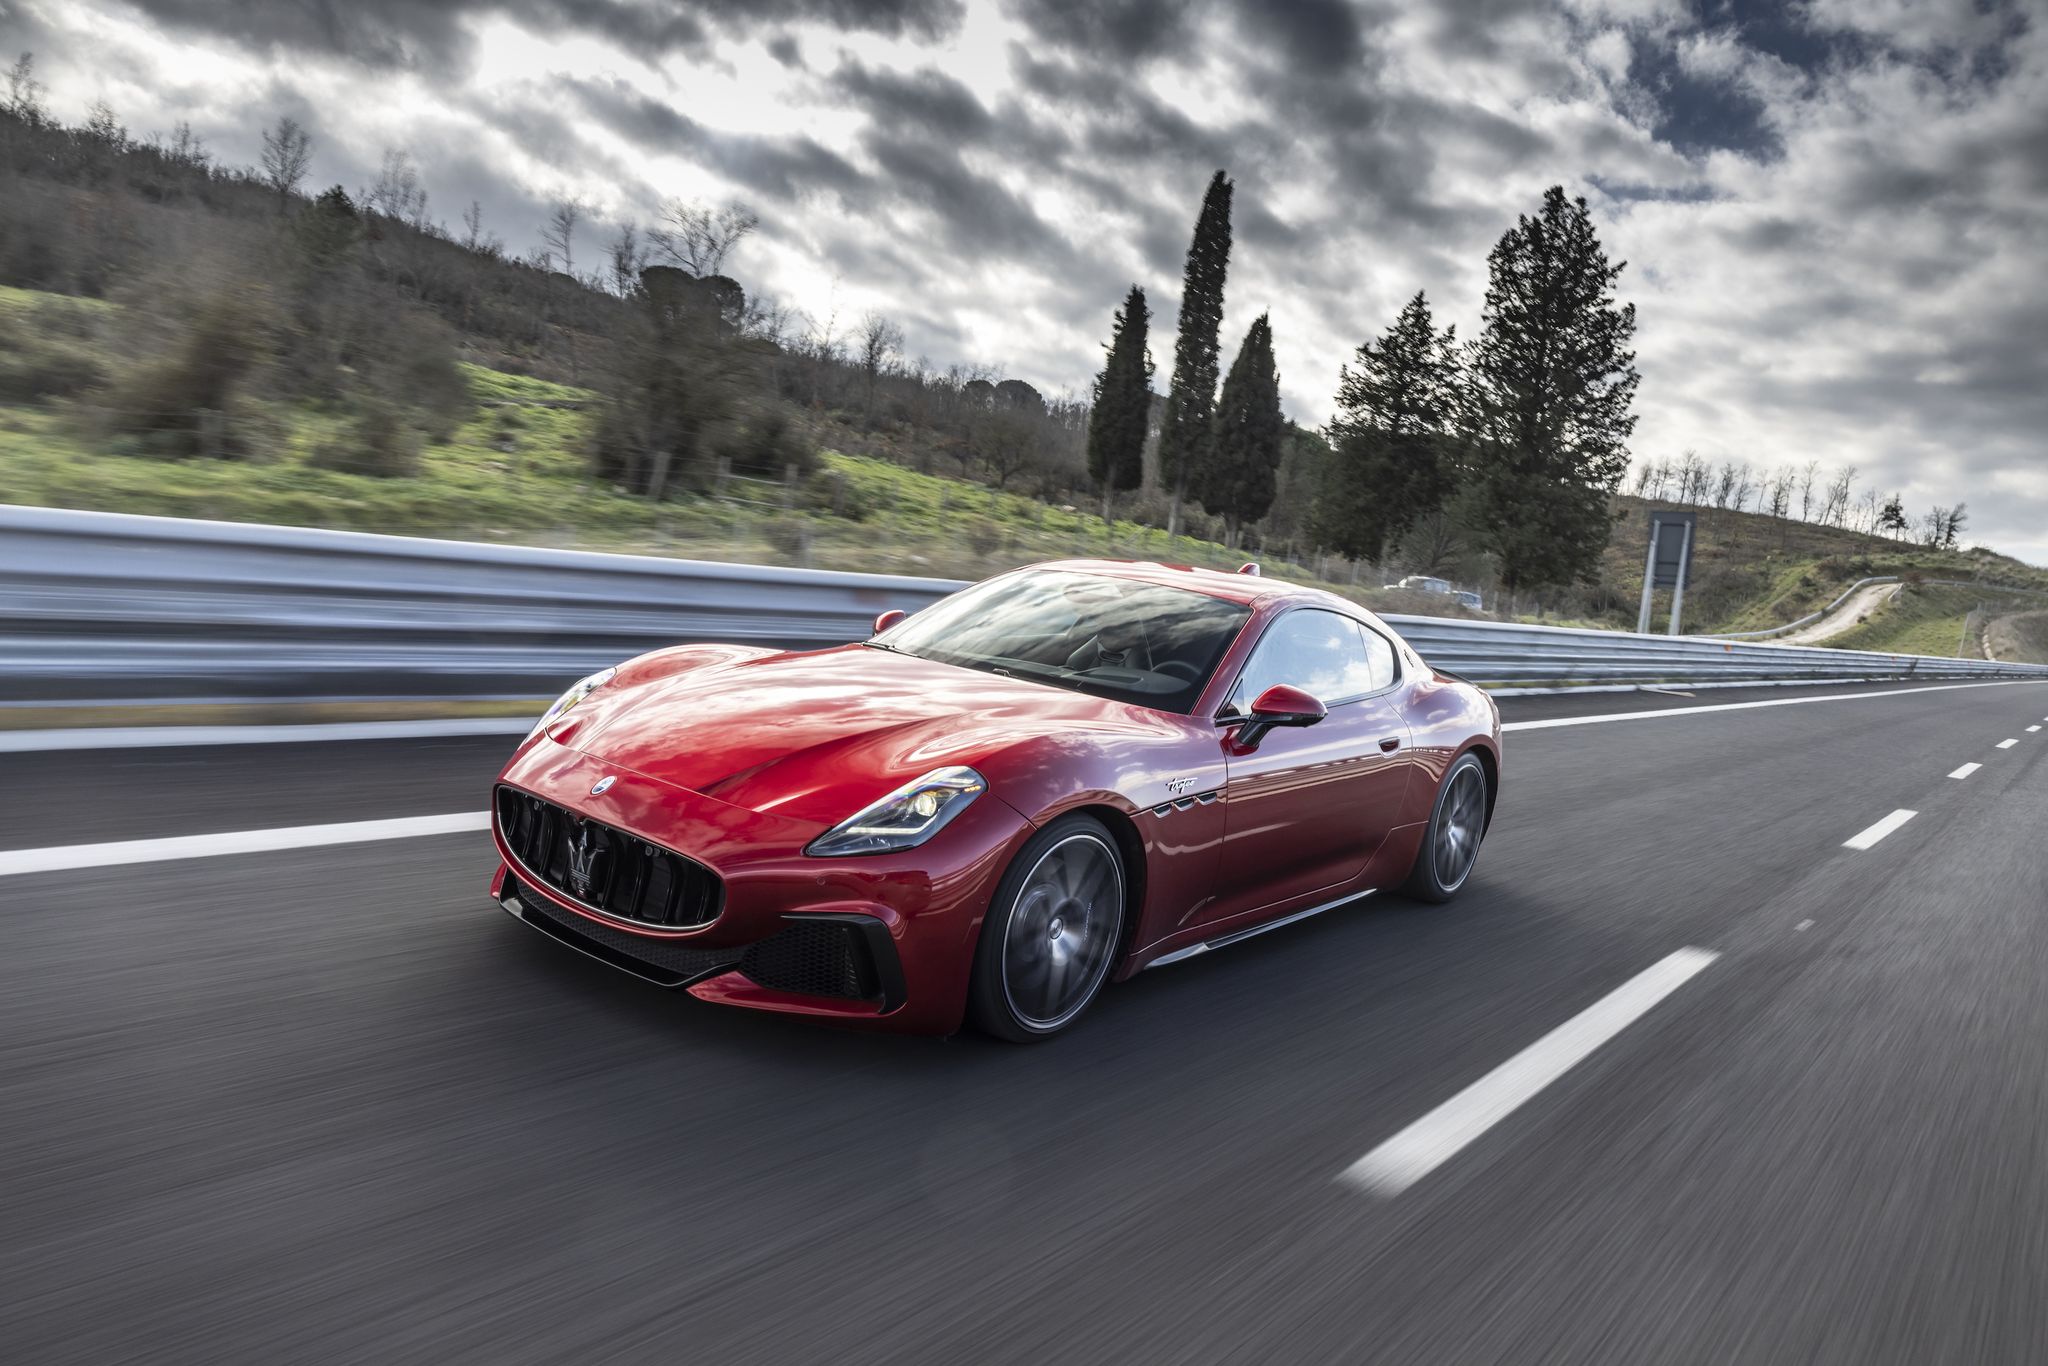 2023 Maserati GranTurismo Review: An Unexpected Shock of Lightning